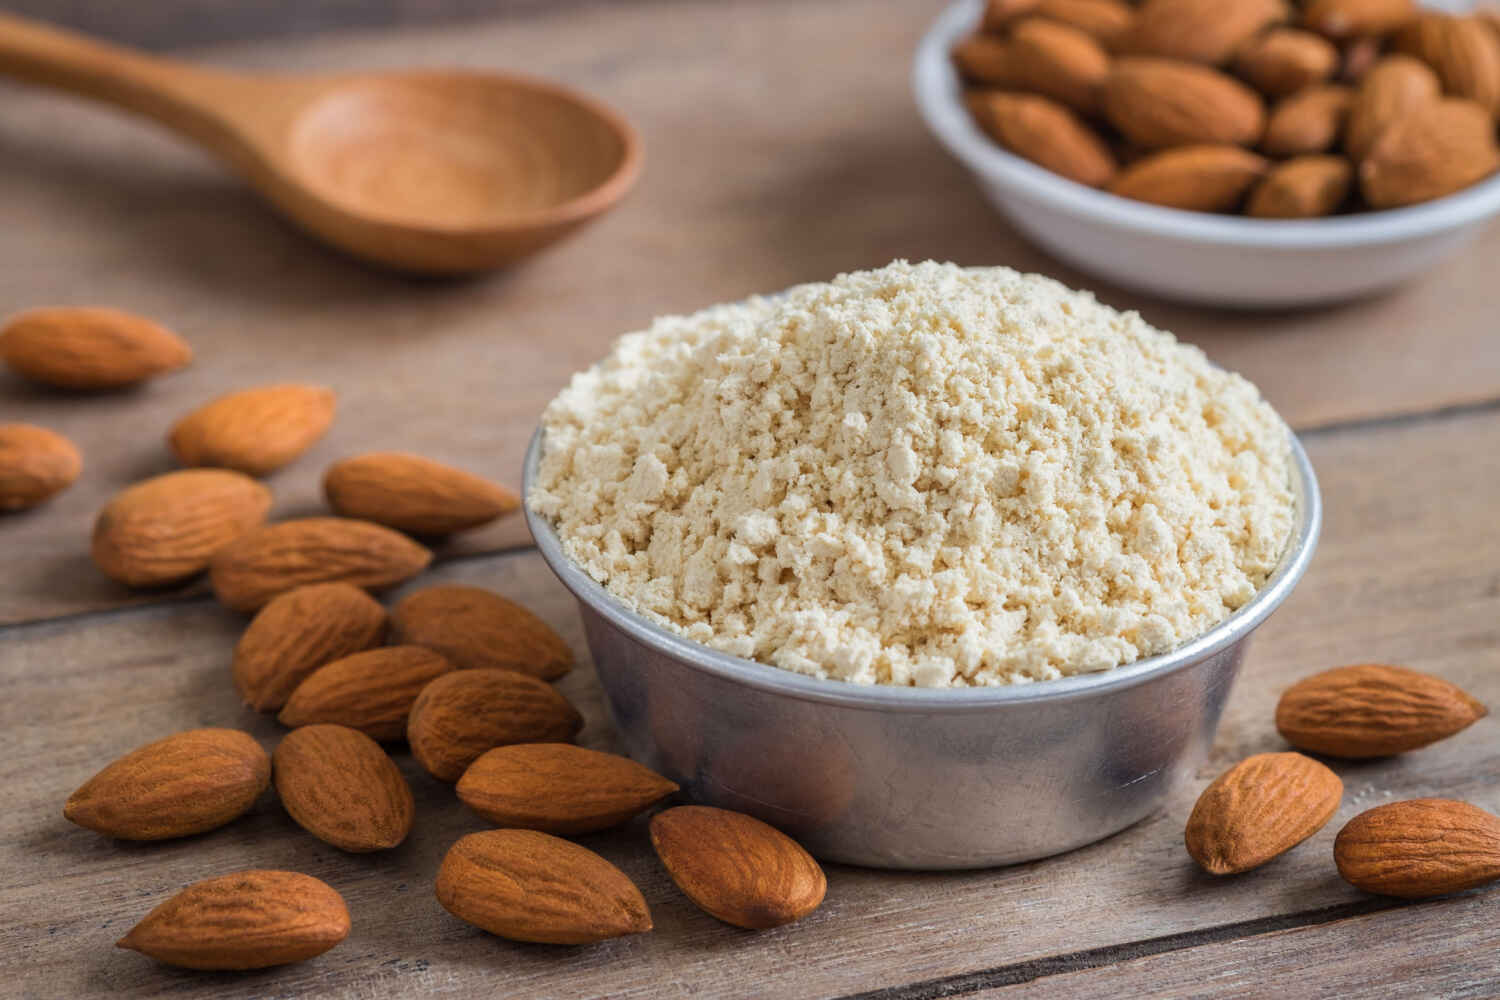 Almond powder has all the goodness of almonds